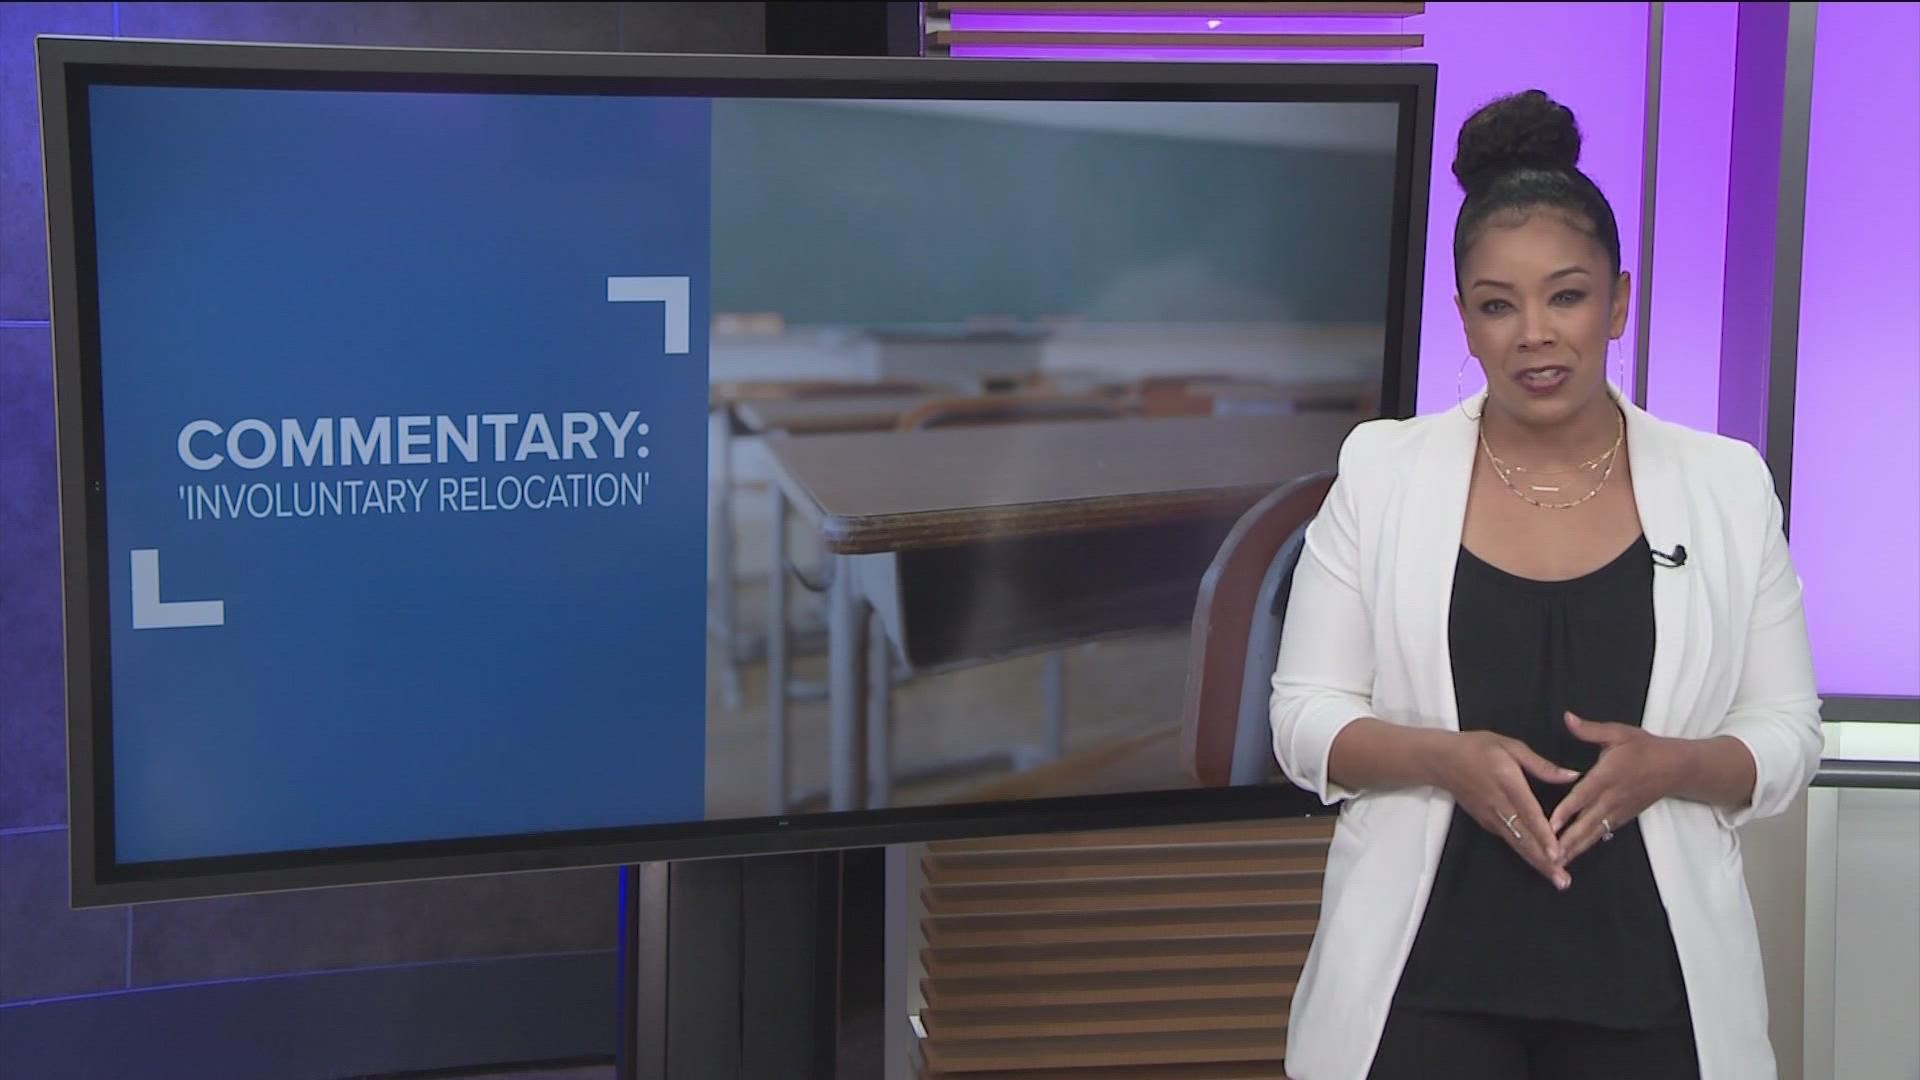 KVUE's Ashley Goudeau shares a commentary on a group of Texas educators that sought to call the transport of enslaved people to the U.S. "involuntary relocation."